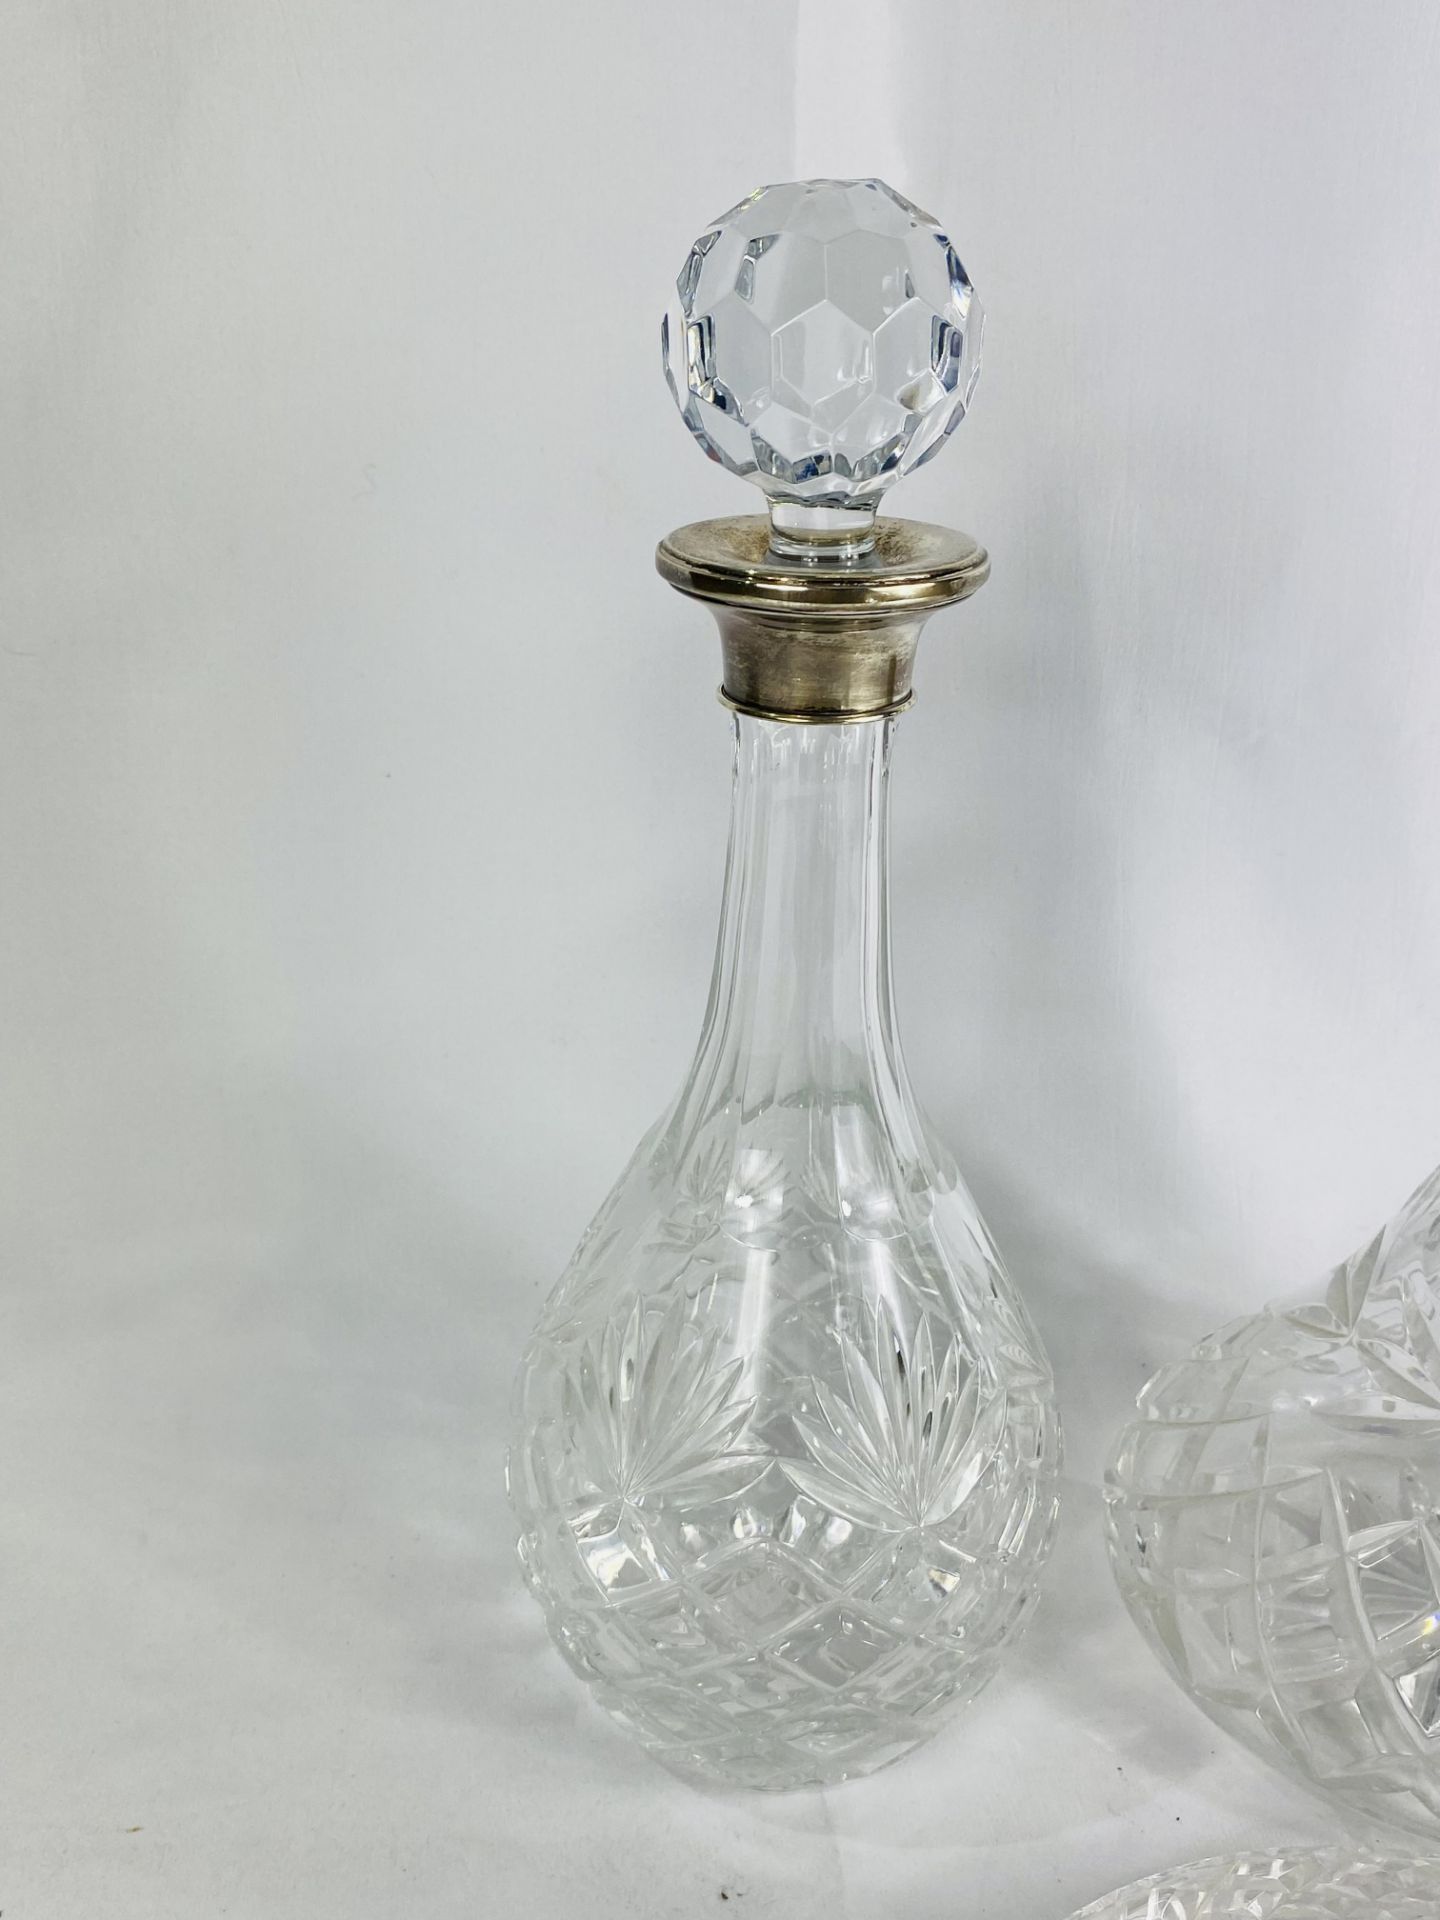 Two cut glass decanters with silver collars together with a cut glass ships decanter - Image 2 of 4